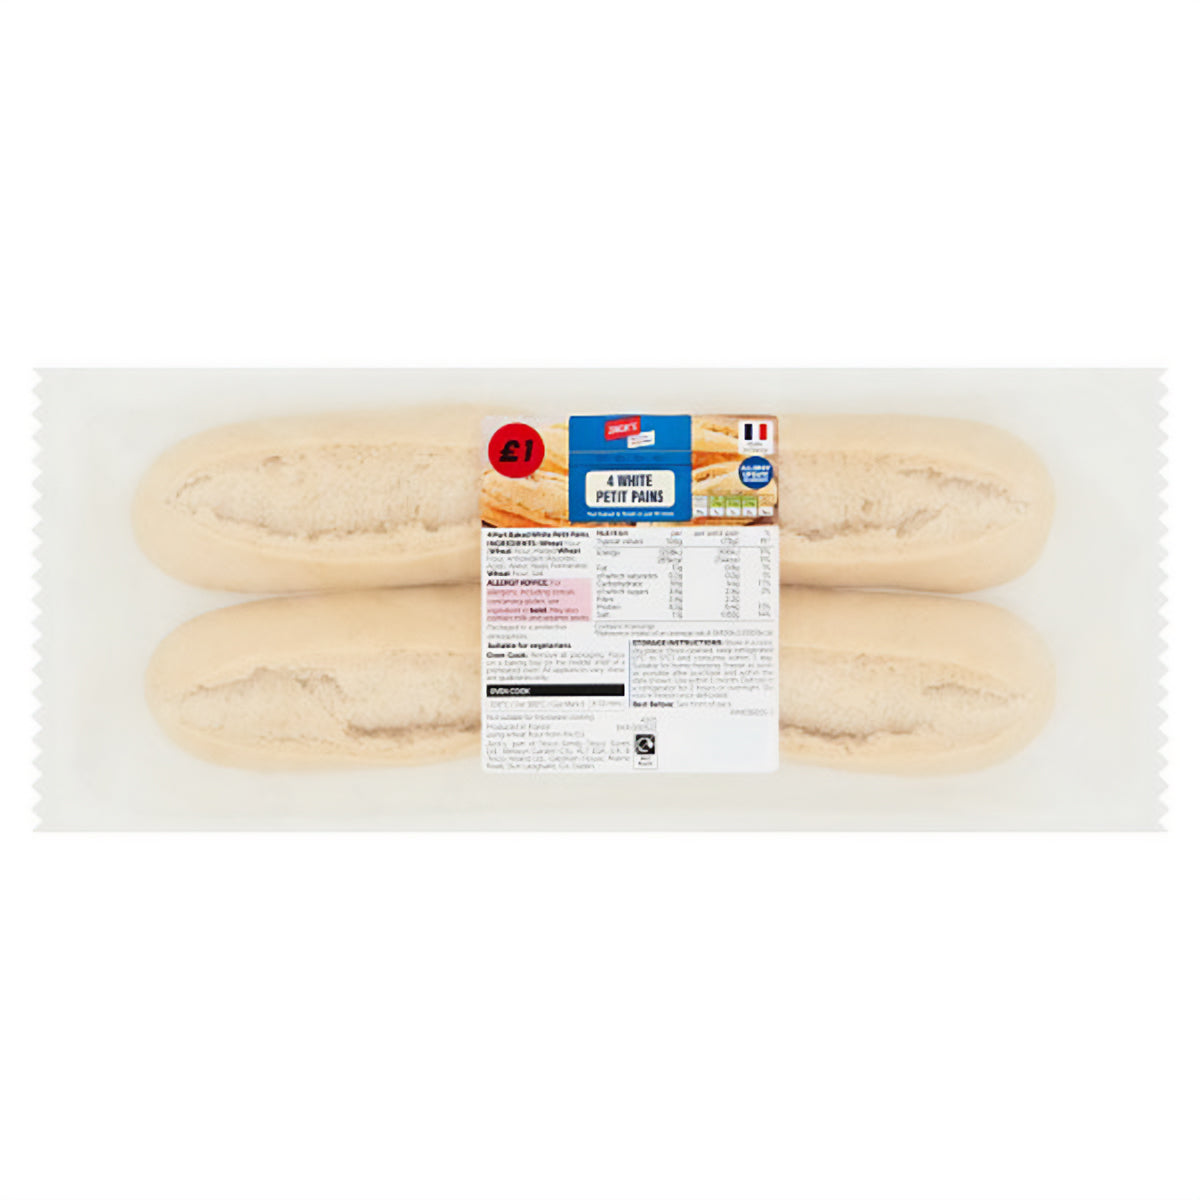 A package of Jacks - Part Baked White Baguettes - 4 Pack on a white background.